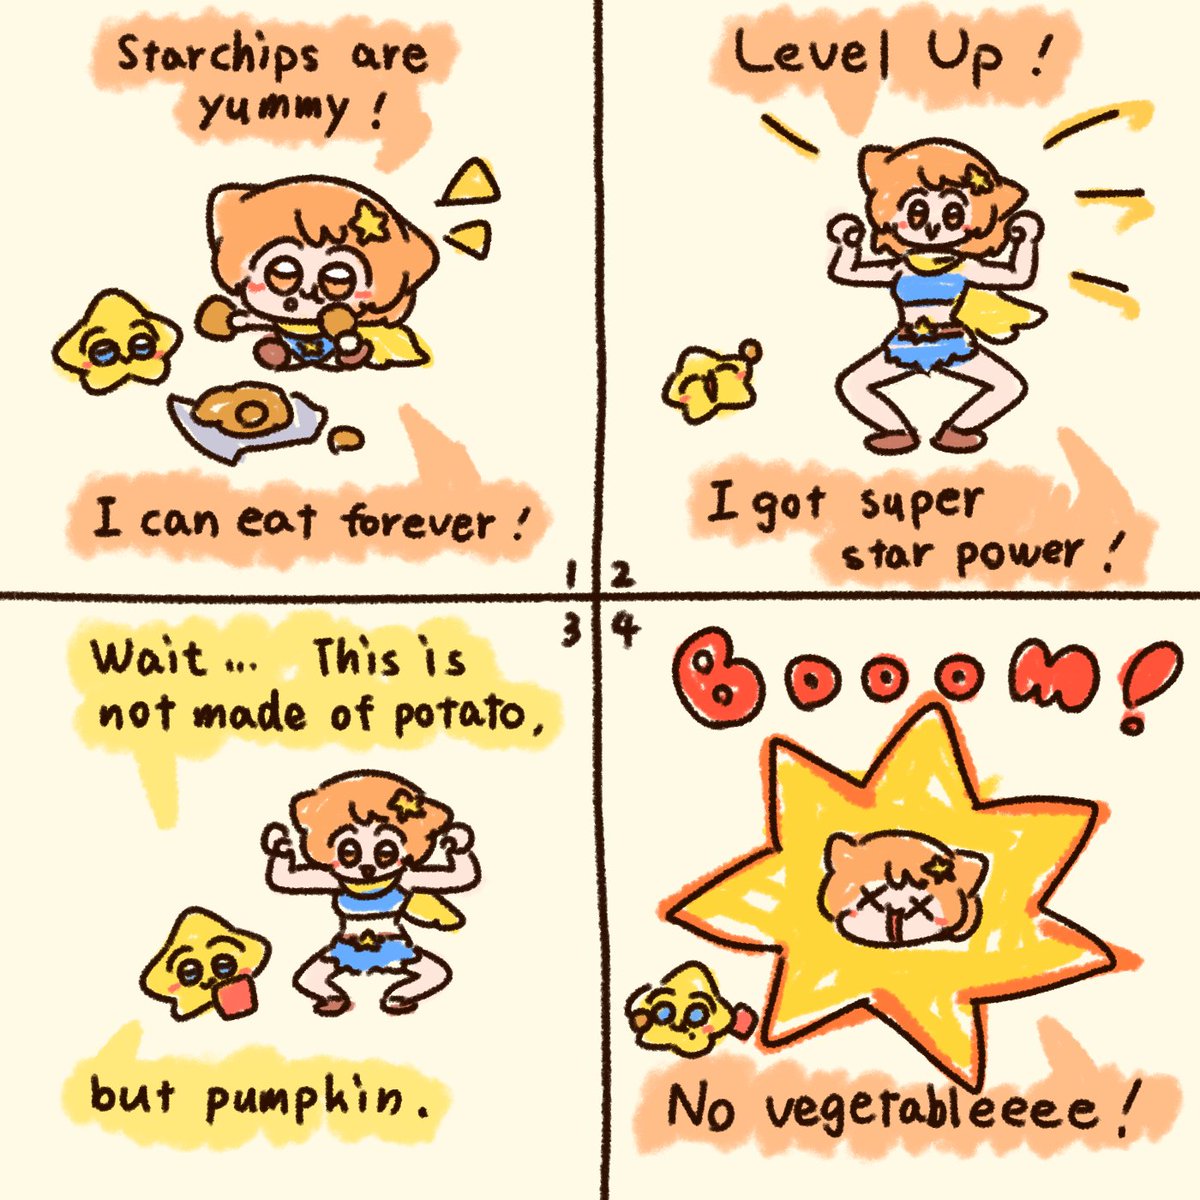 Starchips girl is not good at vegetable!

My OC's cartoon! 